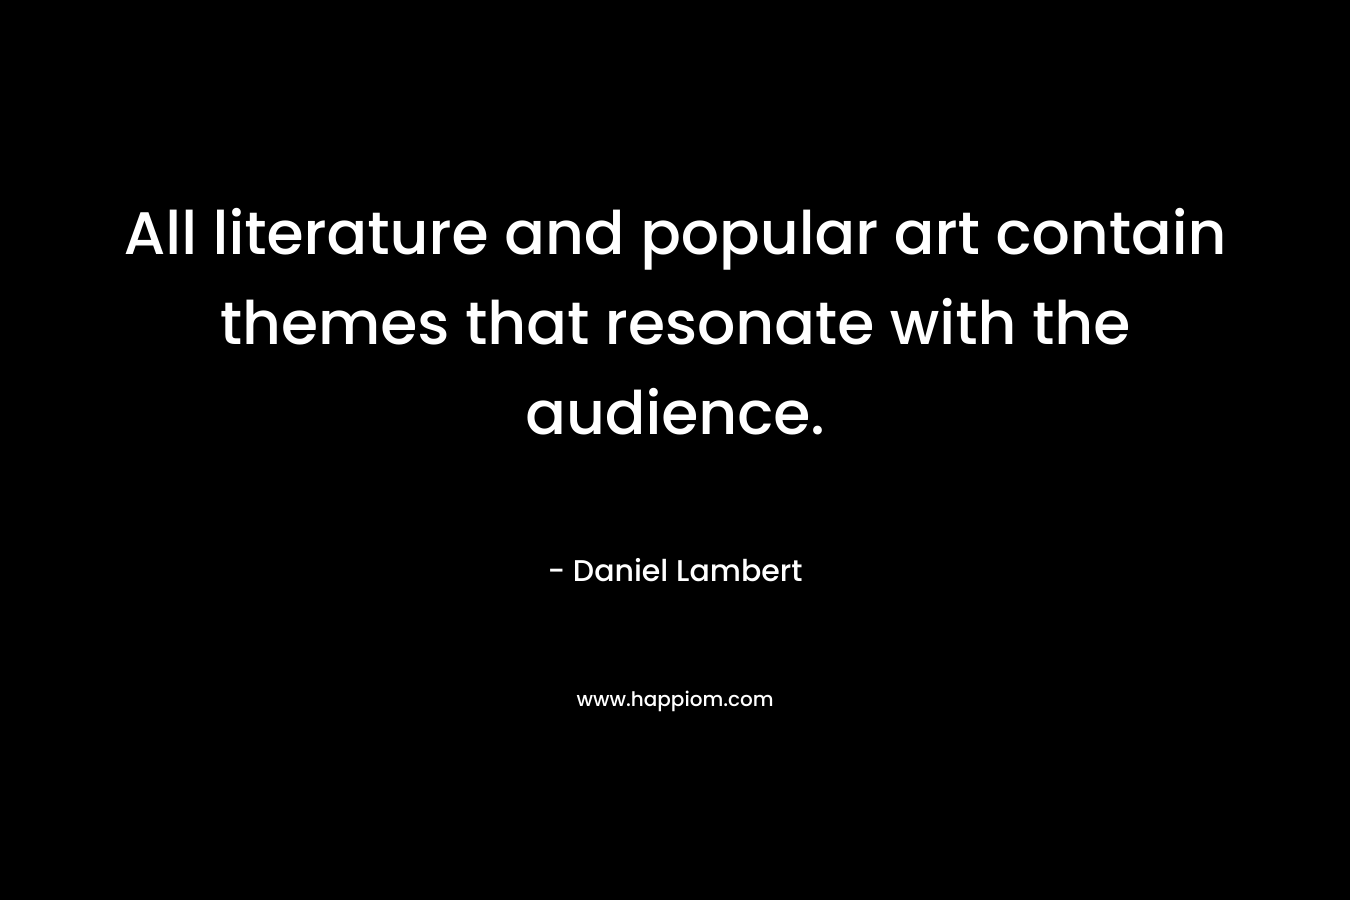 All literature and popular art contain themes that resonate with the audience.